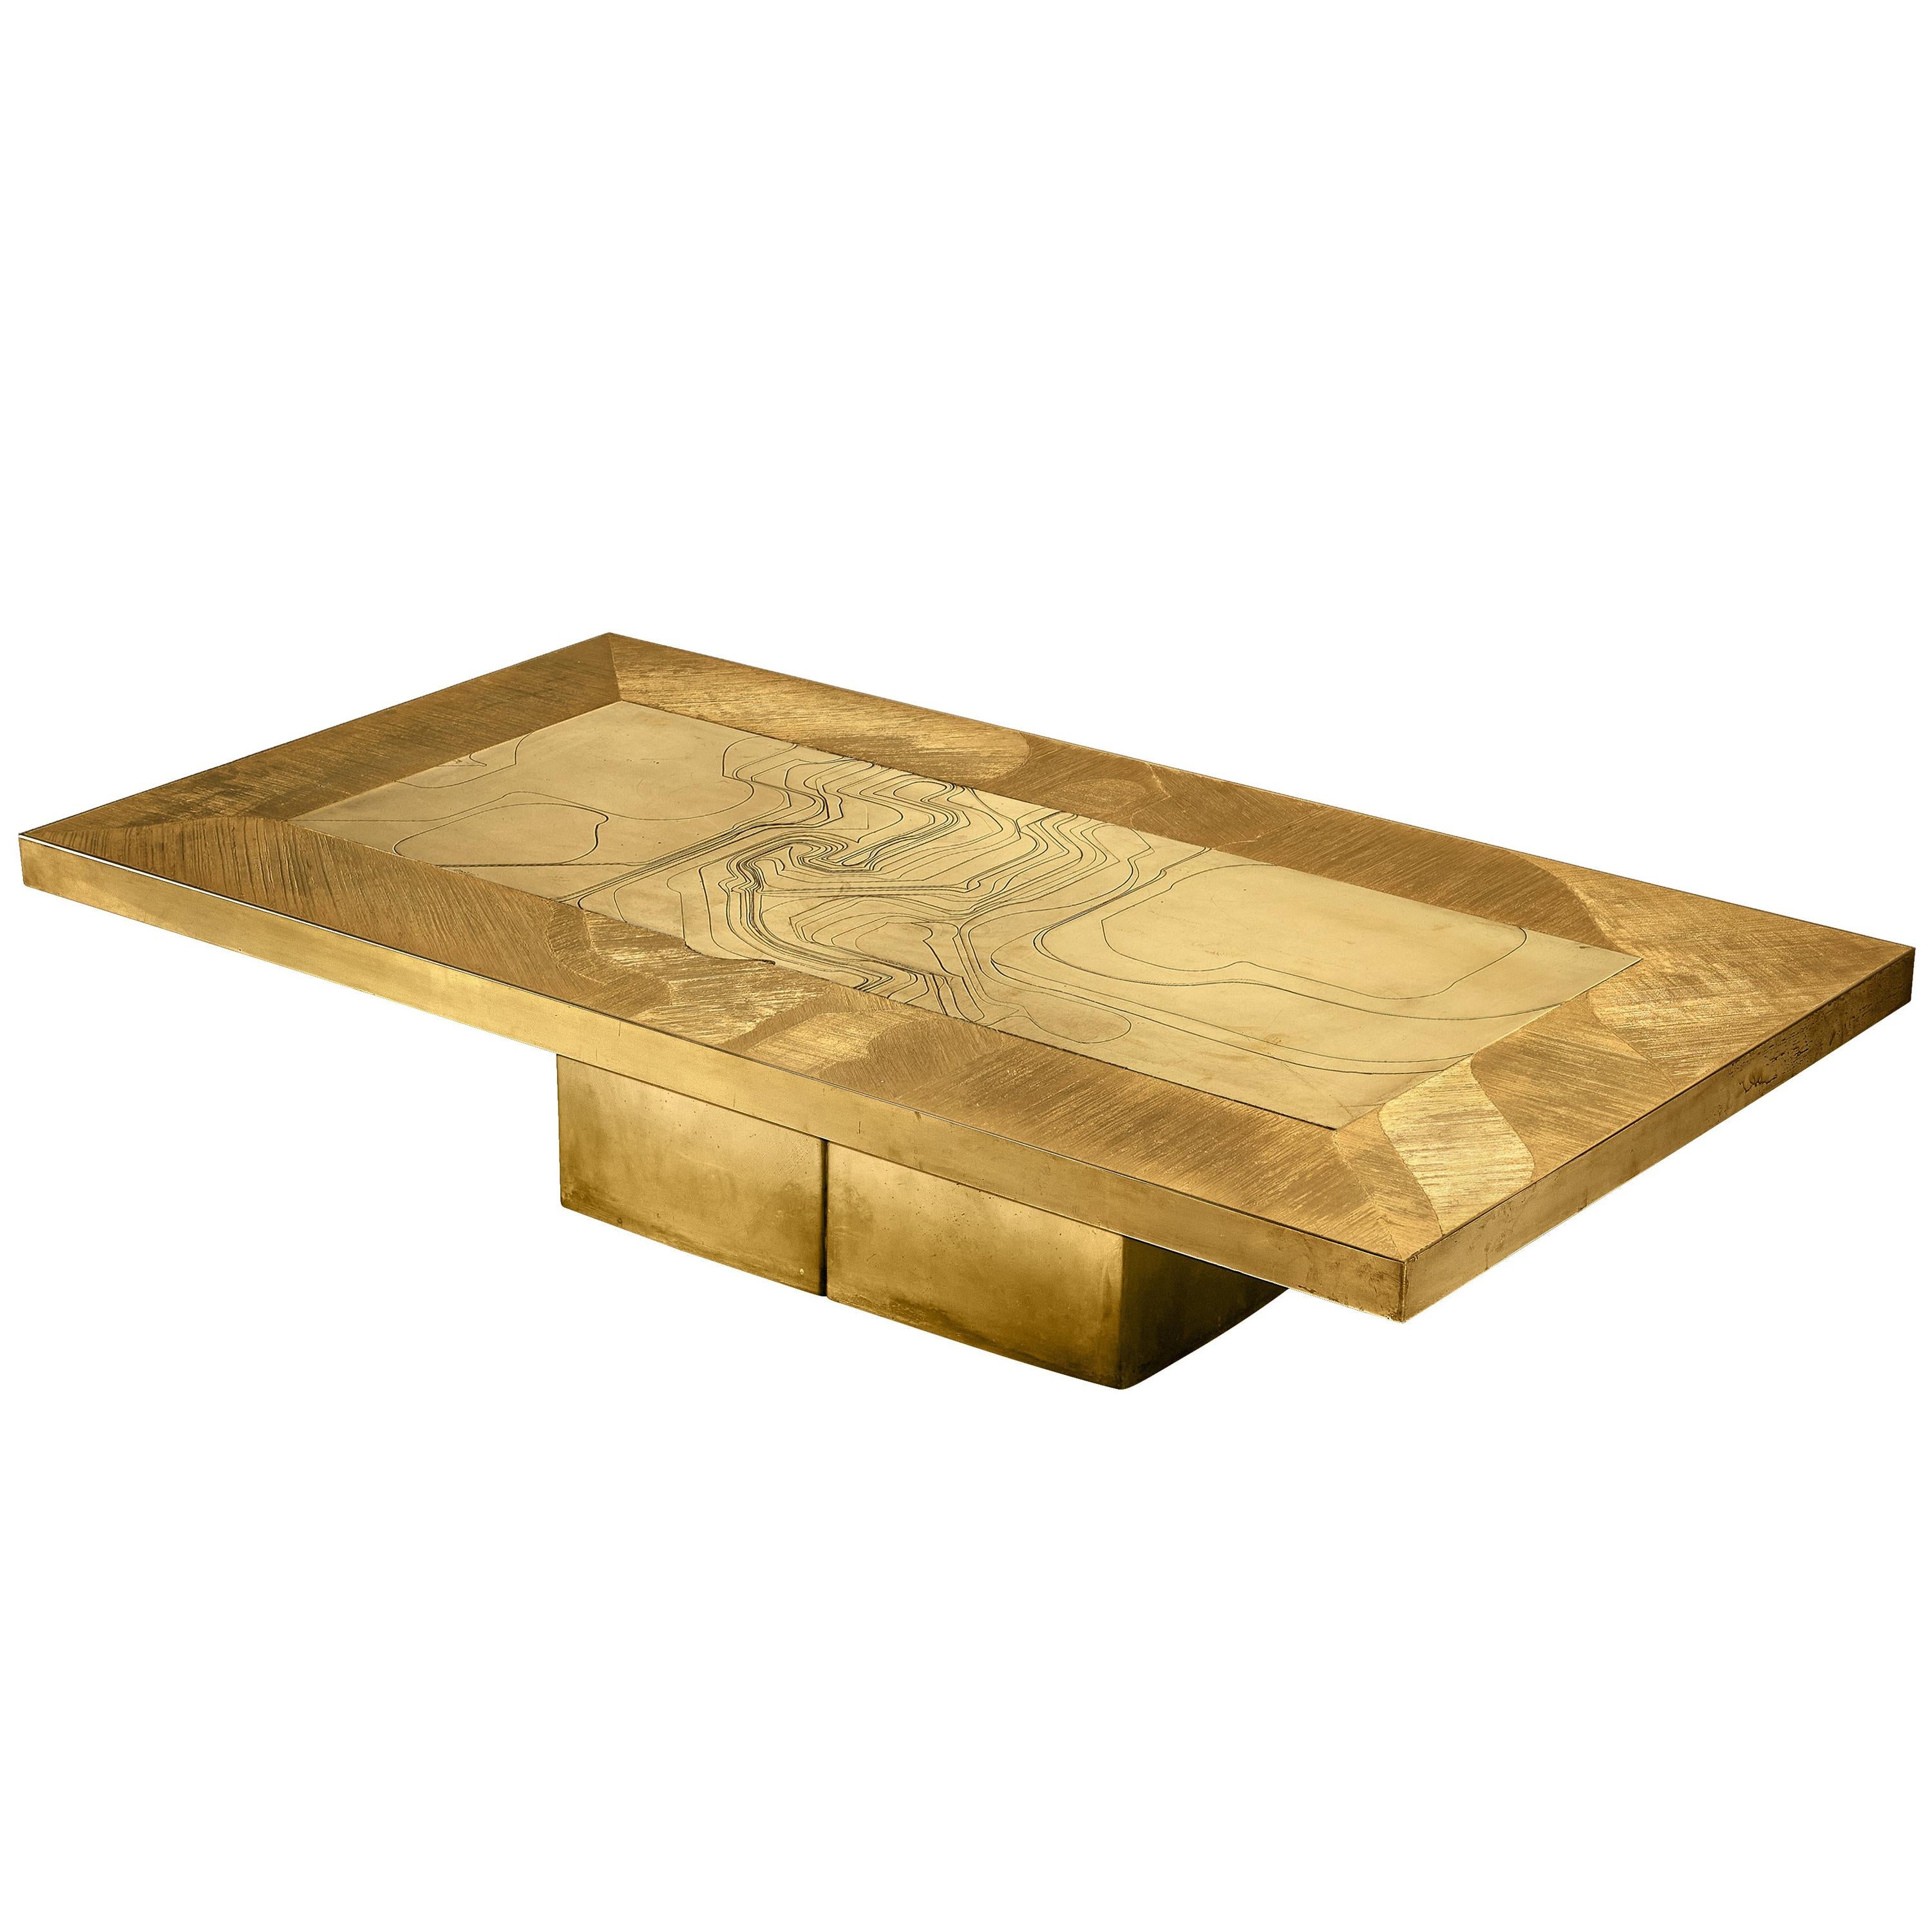 Grand Nadie Jenatzy Coffee Table in Etched Brass